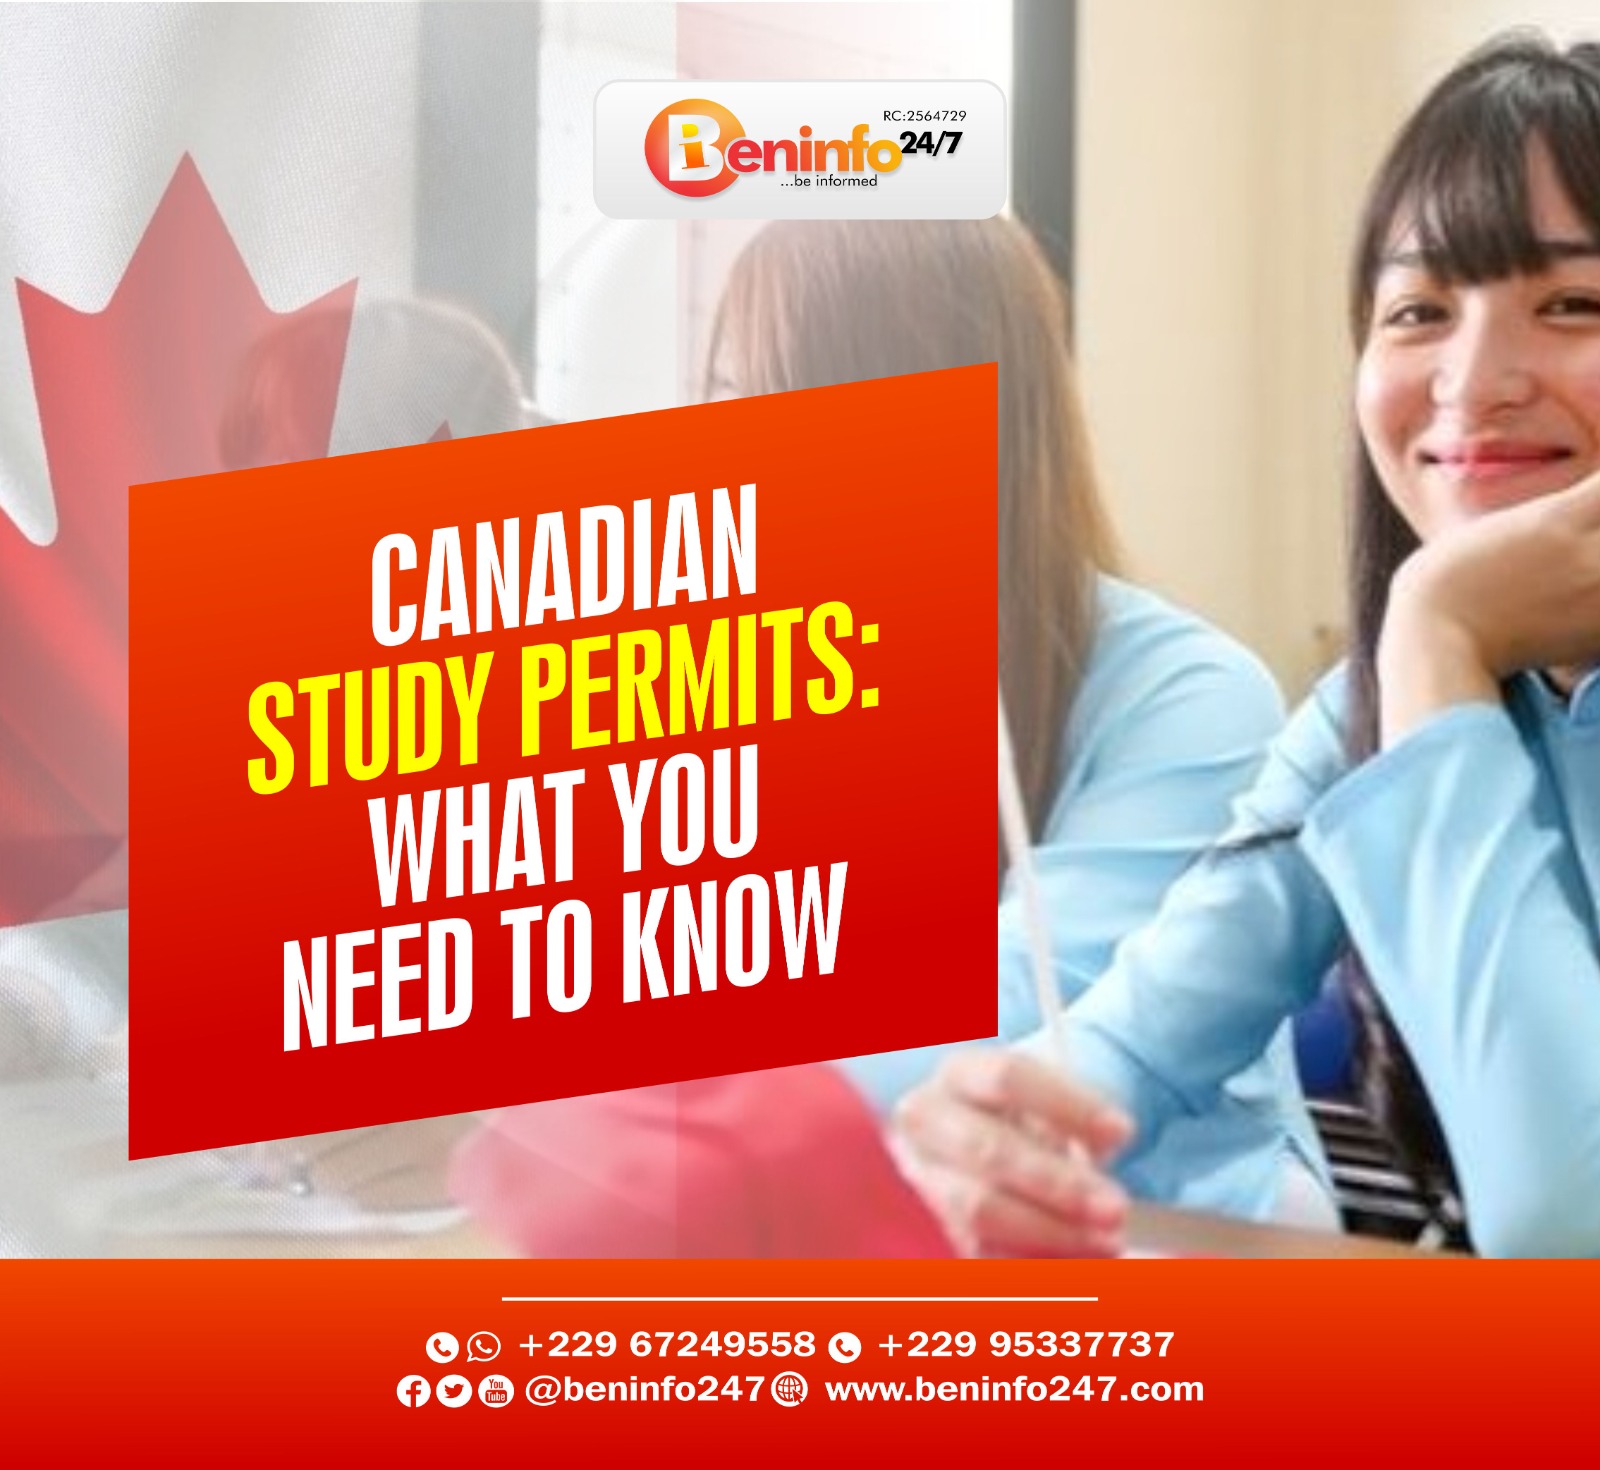 Canadian Study Permits: What You Need to Know